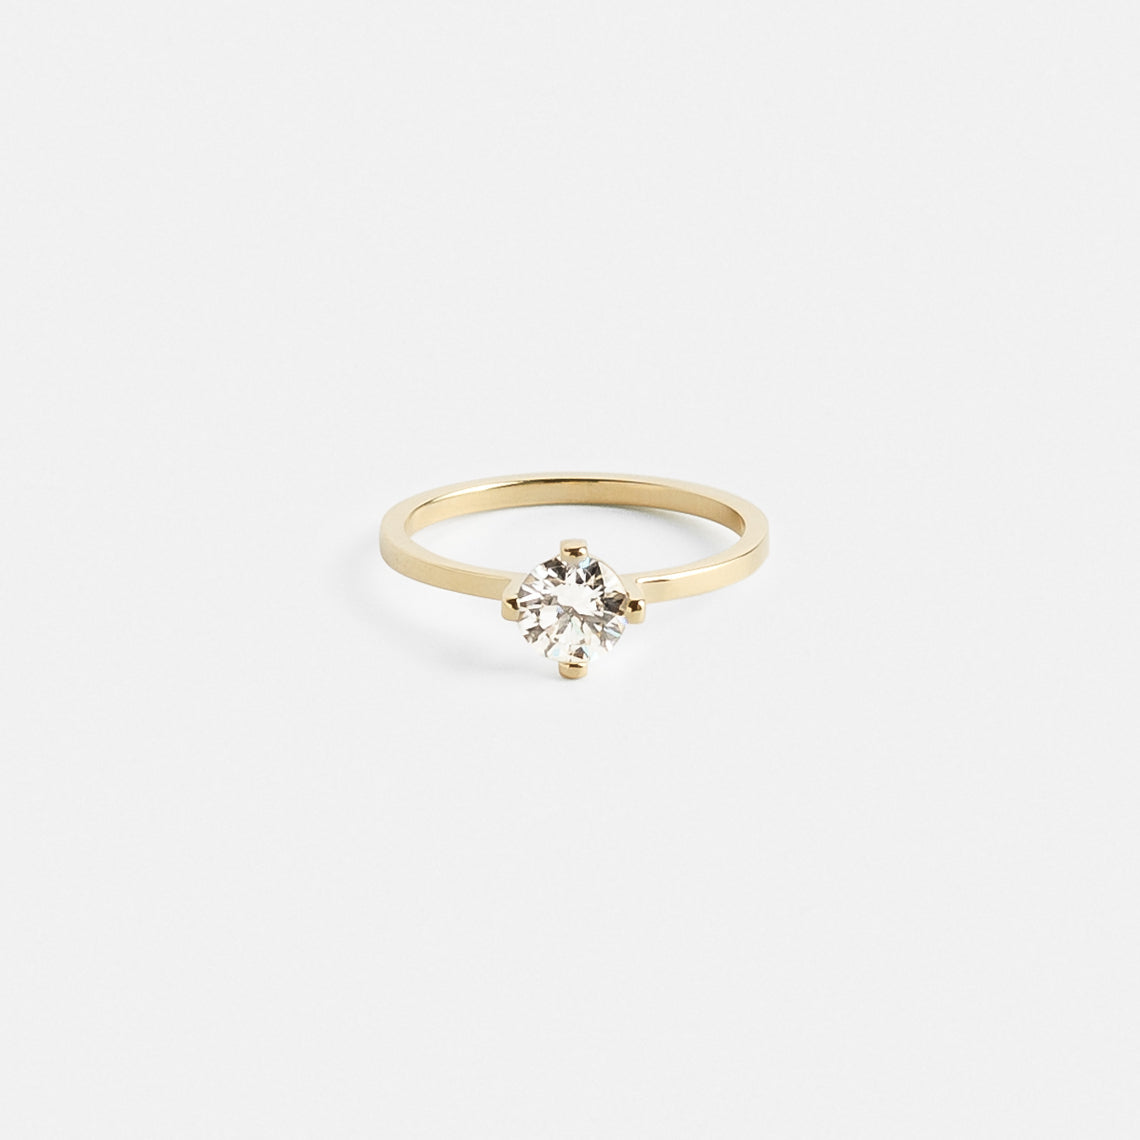 Ema Unique Engagement Ring in 14 karat Gold set with a round brilliant cut 1ct lab-grown diamond By SHW Fine Jewelry NYC